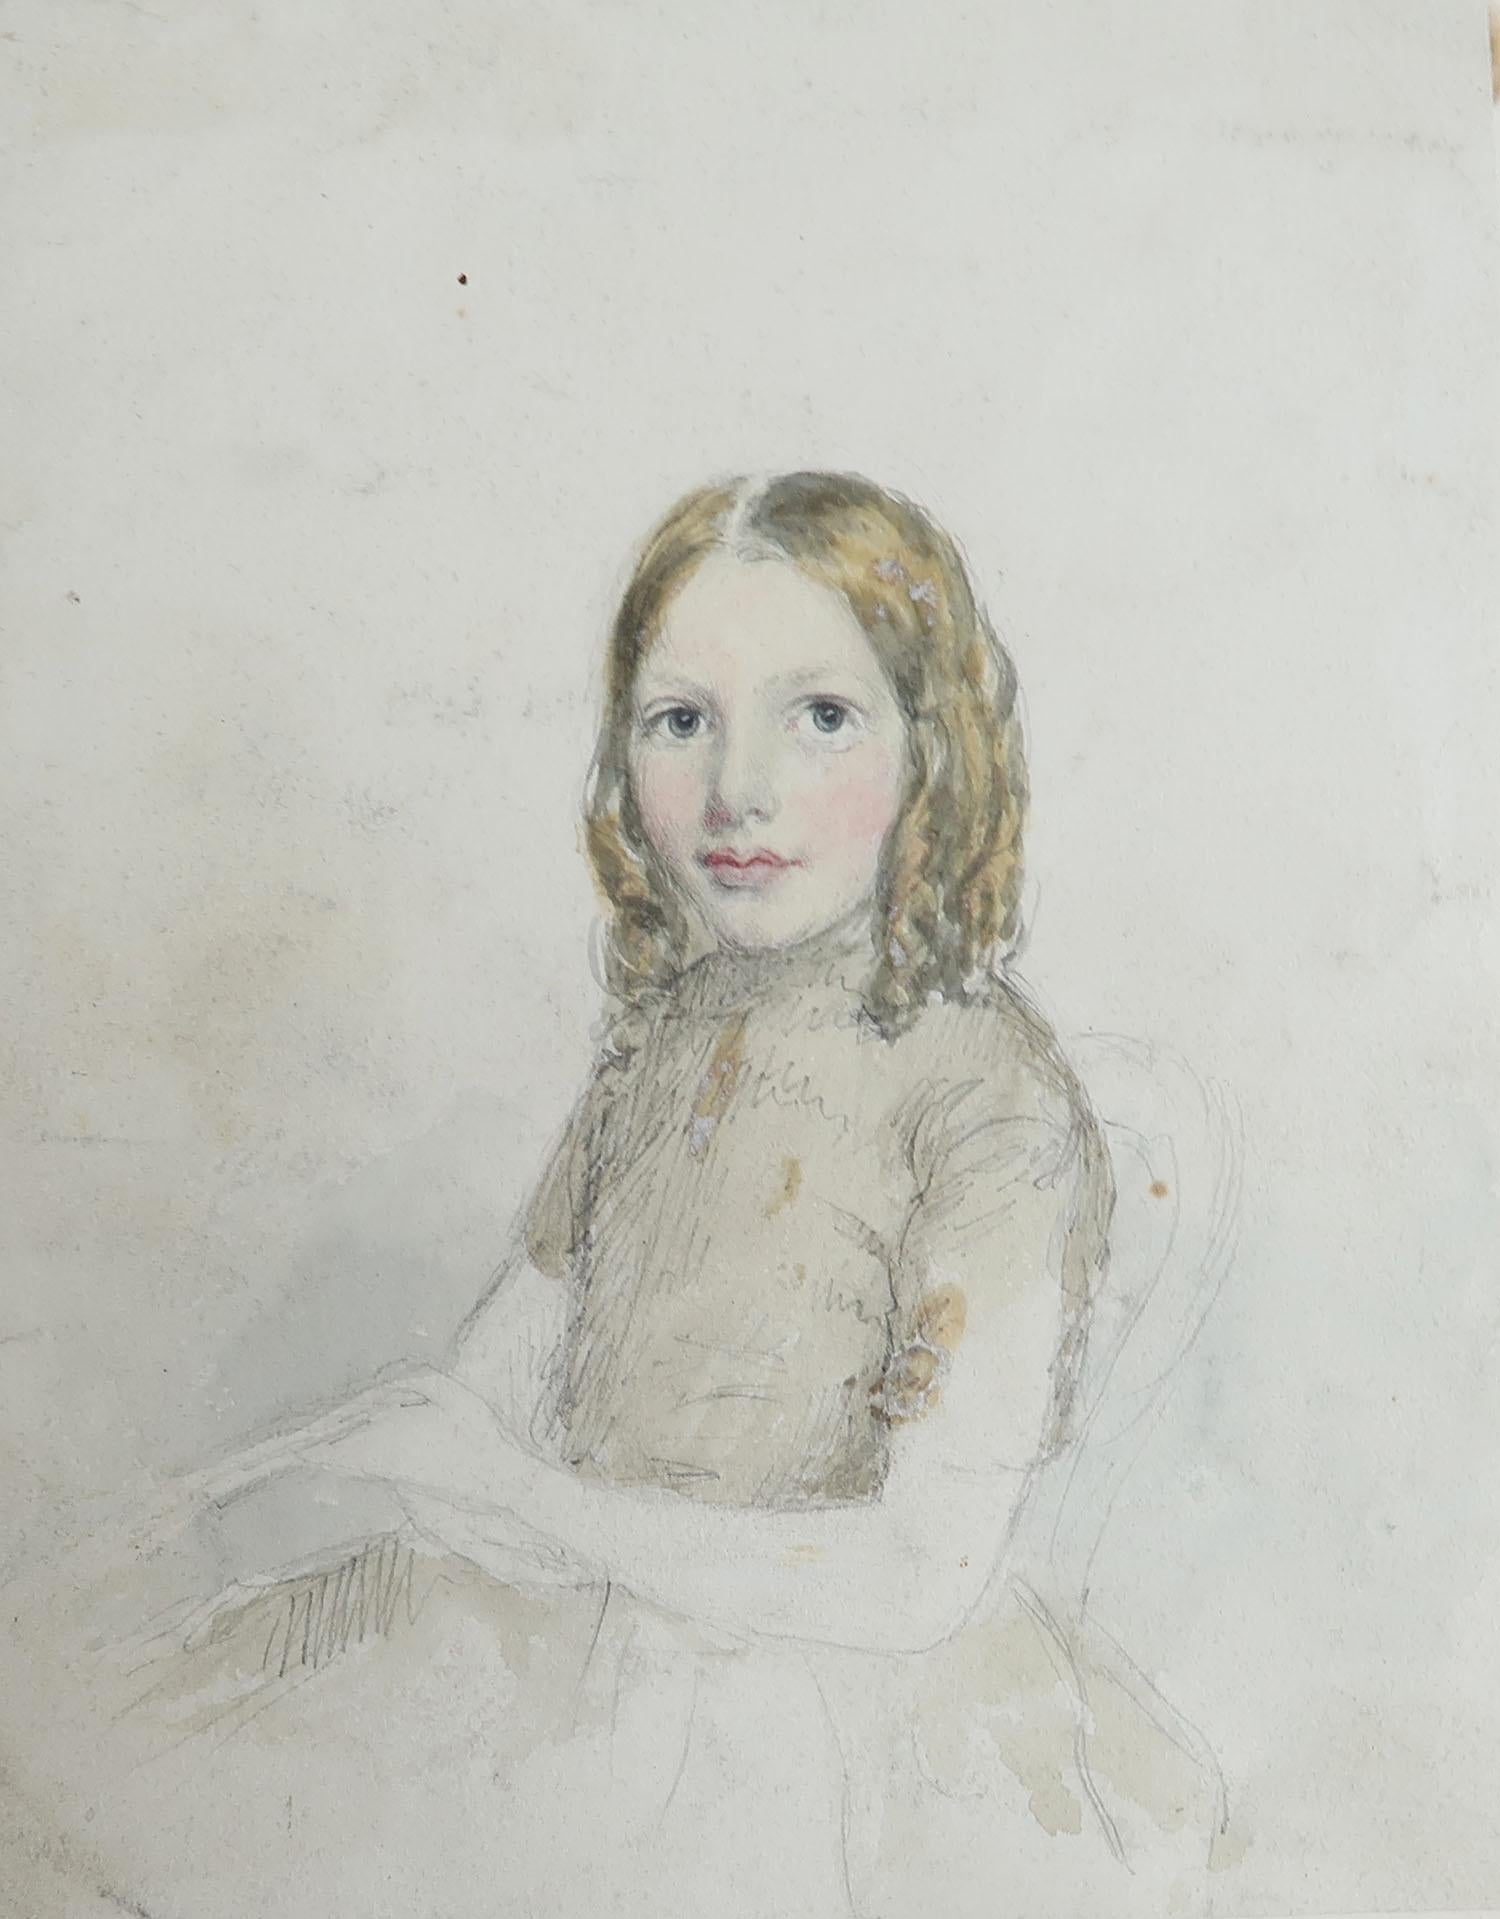 A beautiful watercolor of a a young lady. 

Fabulous quality

The sitter is Lucy Grundy. Related to the artist Robert Hindmarsh Grundy*

On paper applied to card

Unsigned

Unframed

Some minor foxing and a slight surface disruption top